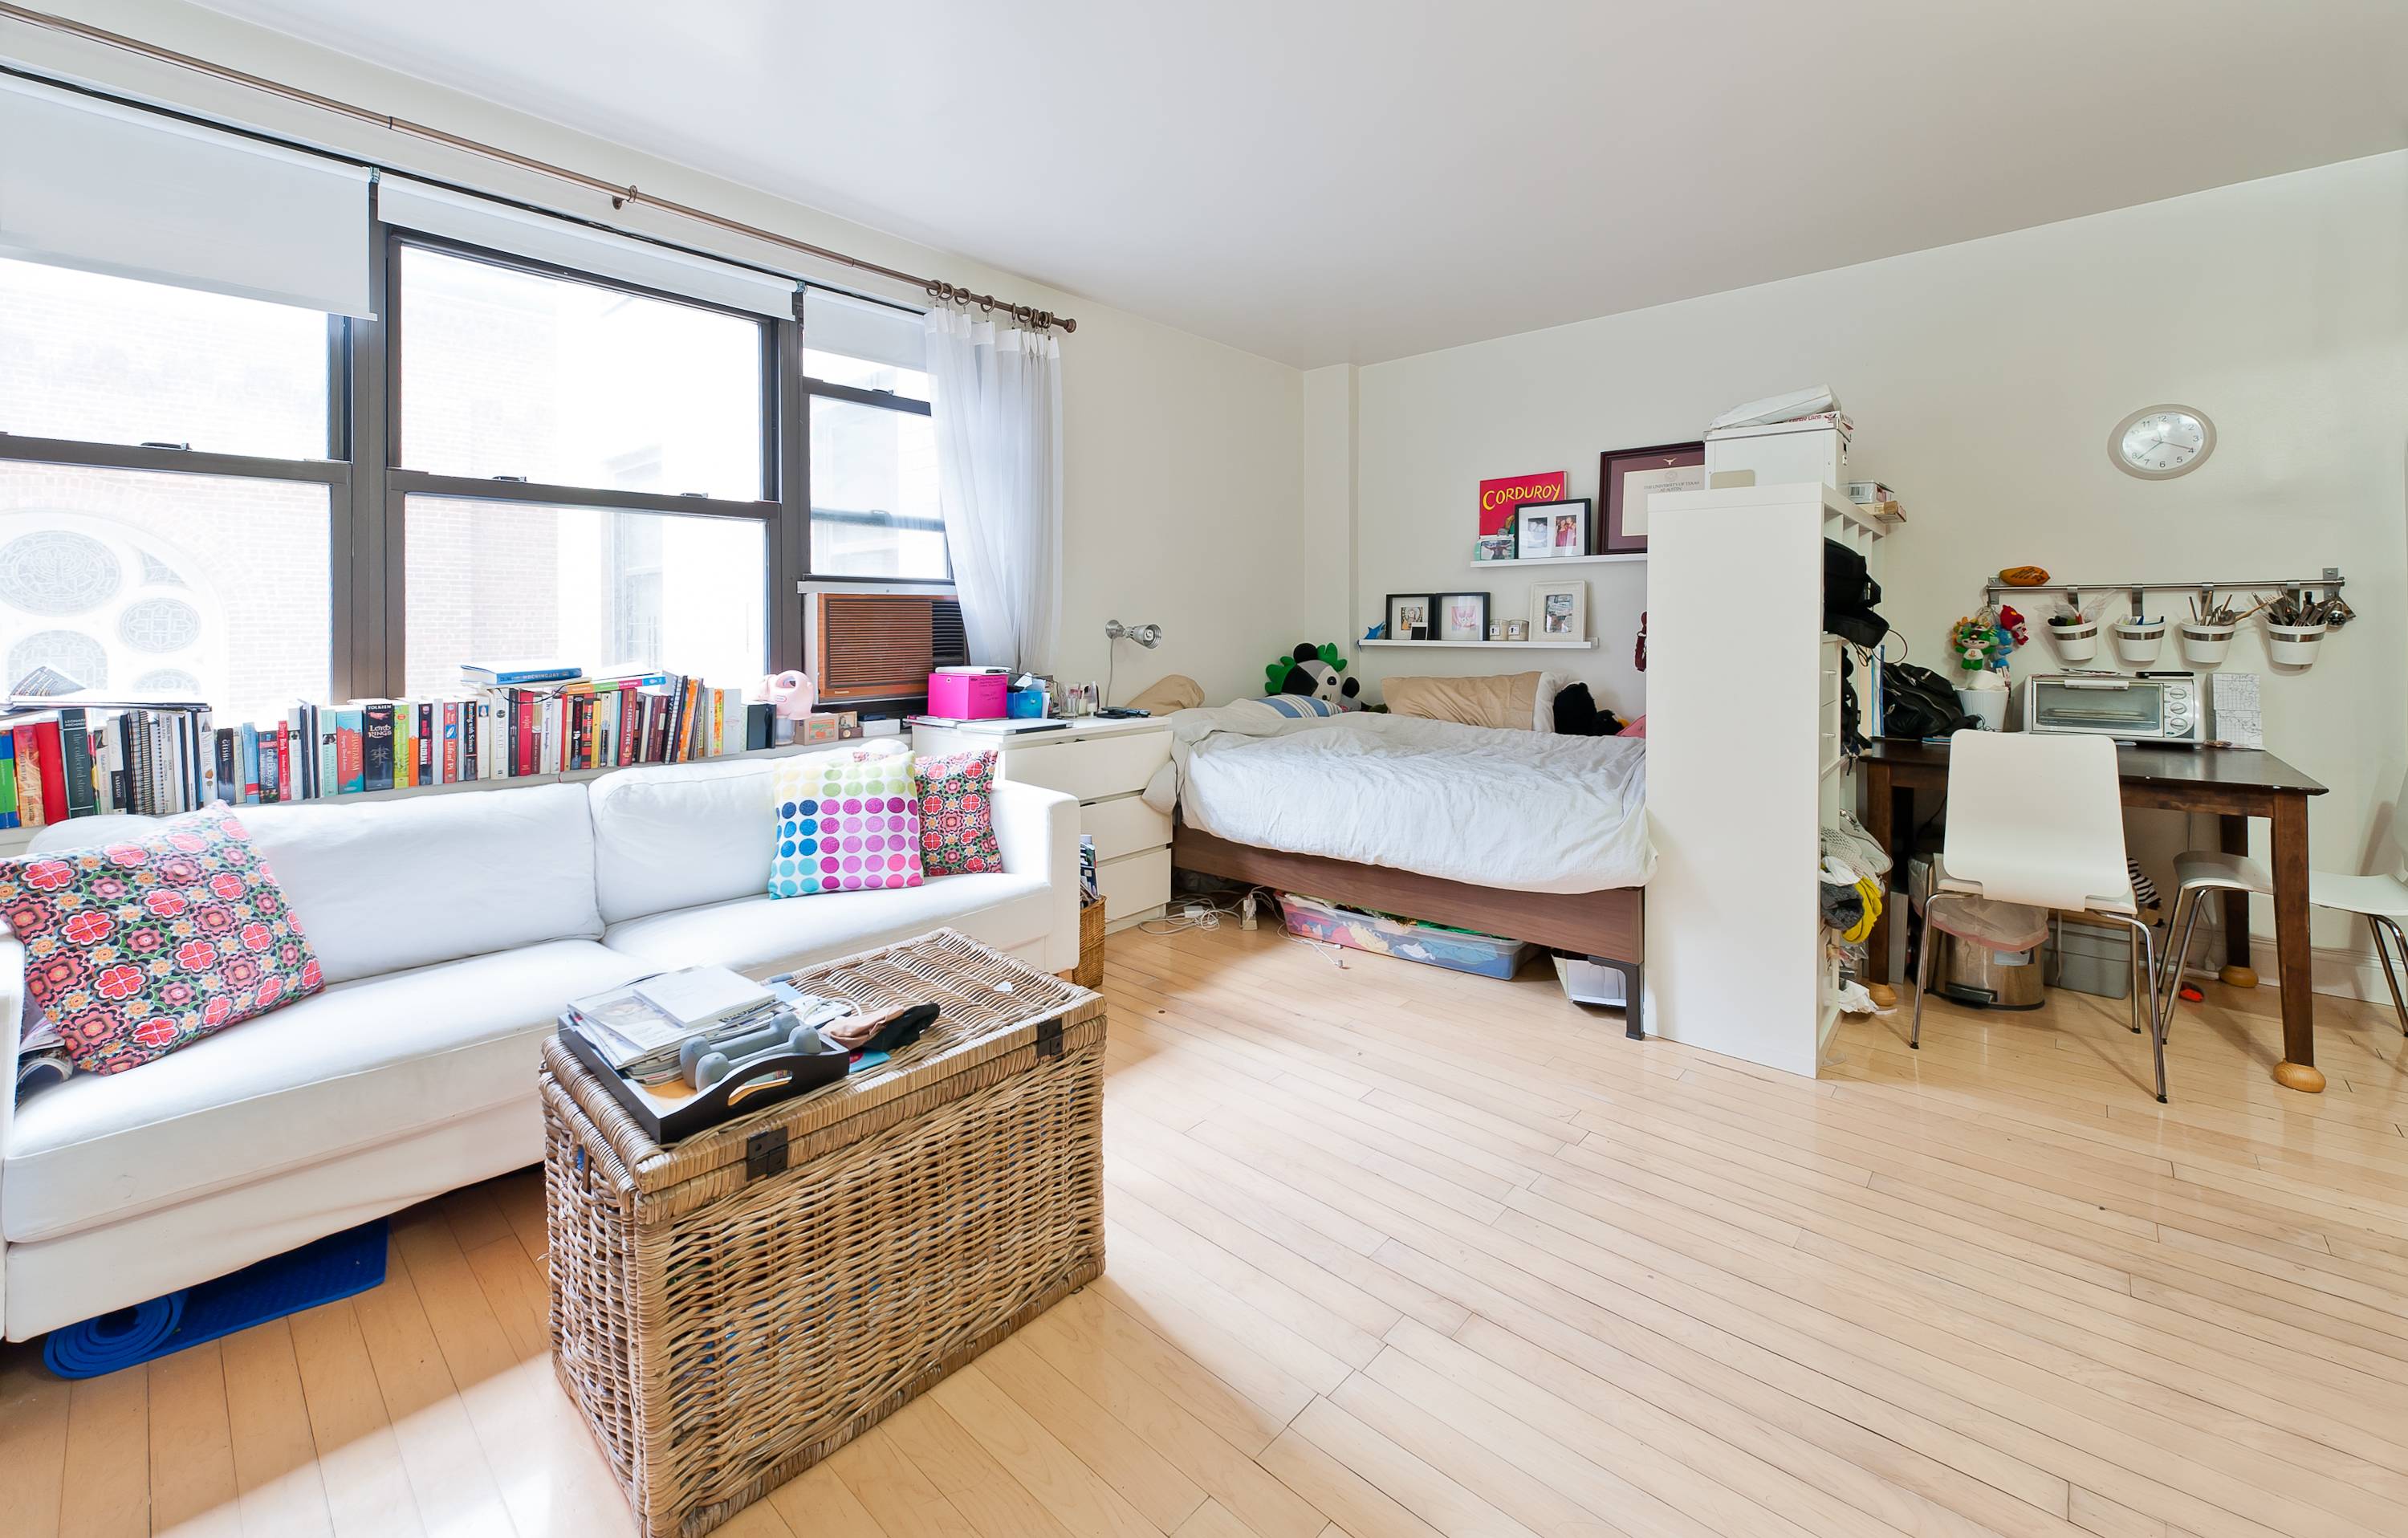 Midtown East 135 East 54th Street The Lex 54 Condominium Beautiful Renovated Studio in Prime Location, Close Proximity to Central Park, Subways, Shops.